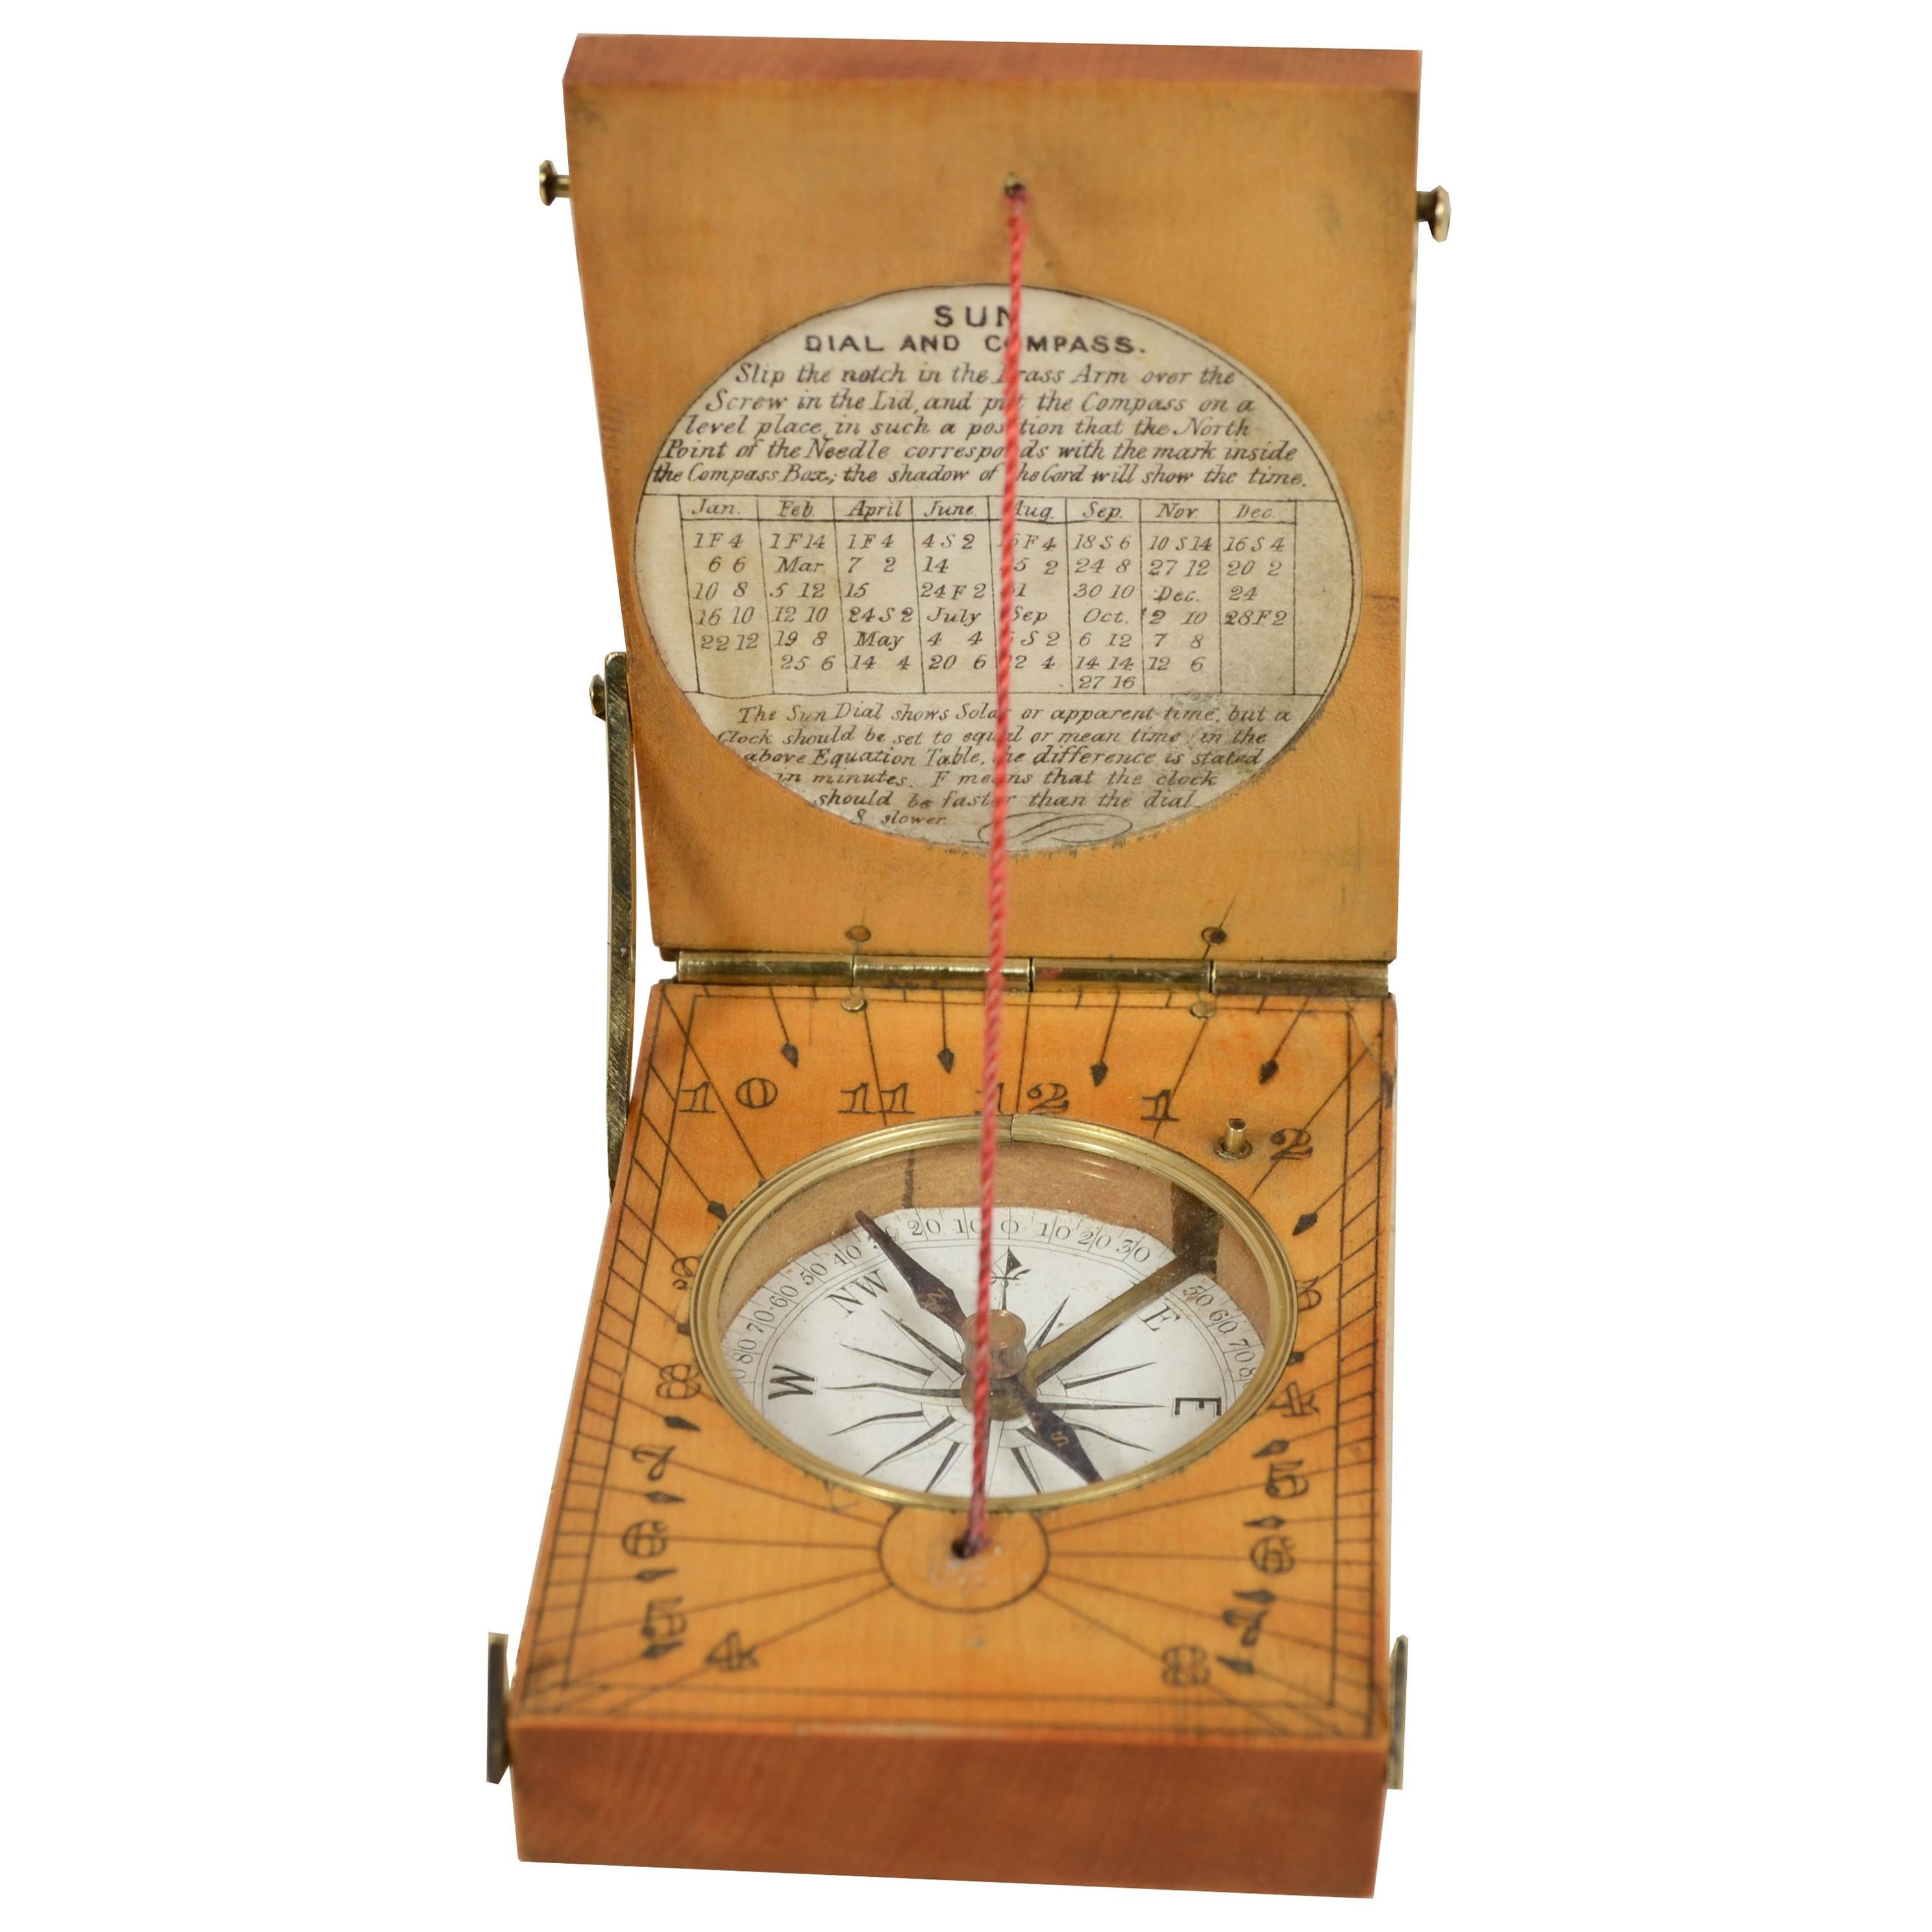 Engraved boxwood sun clock English manufacture mid-19th century. For Sale